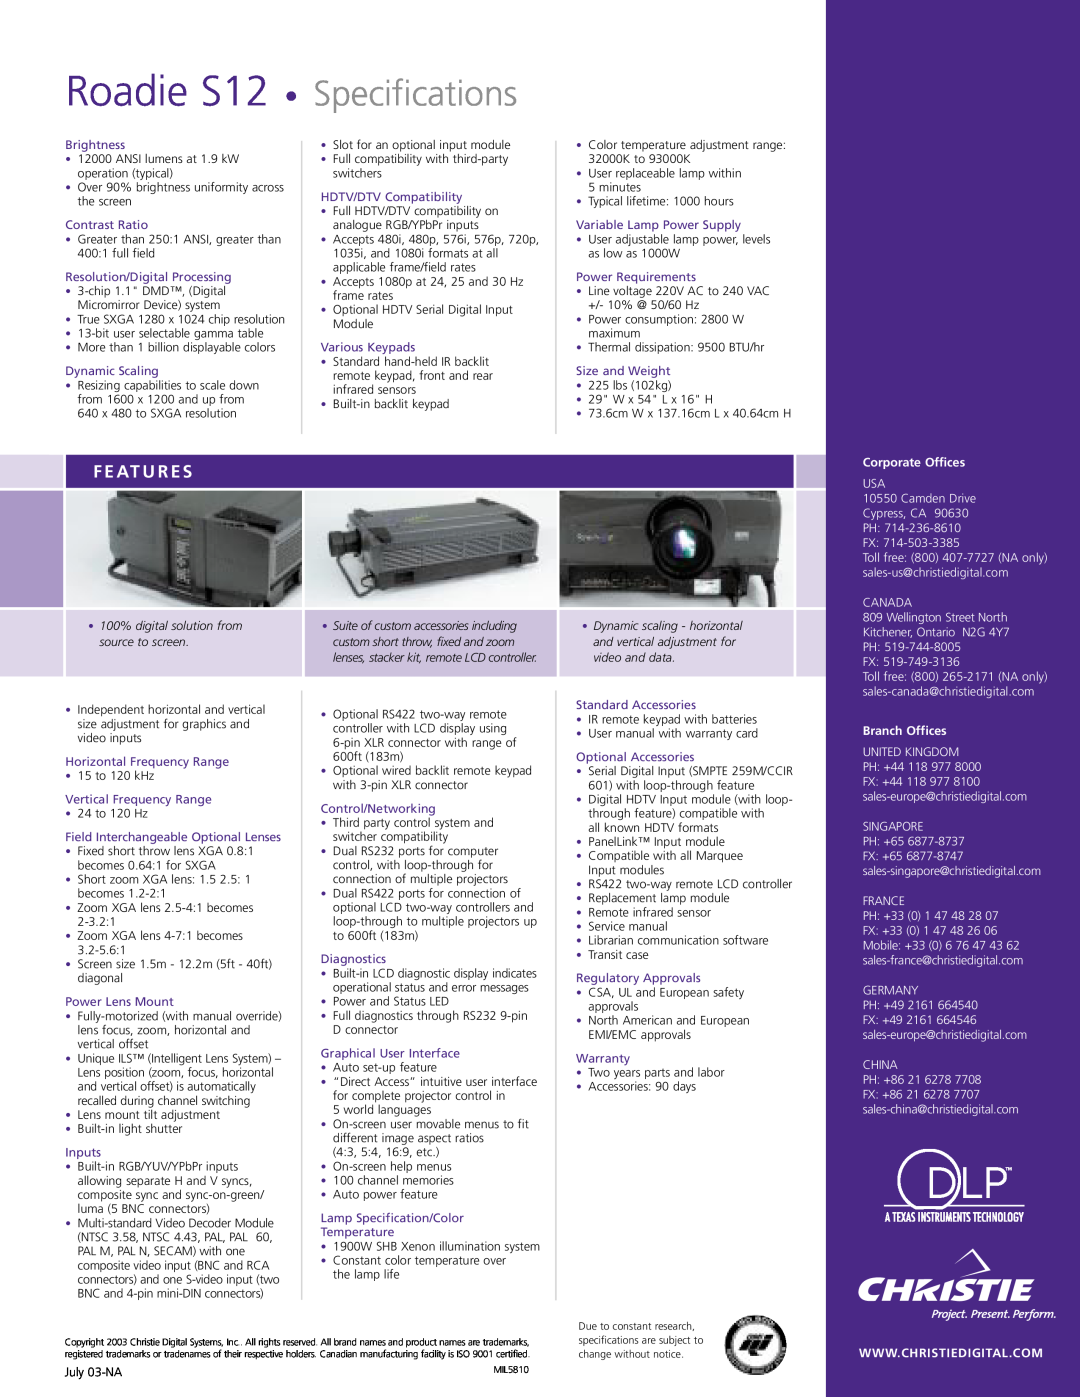 Christie Digital Systems F E At U R E S, Roadie S12 Specifications, Corporate Offices, Branch Offices, GERMANY PH +49 